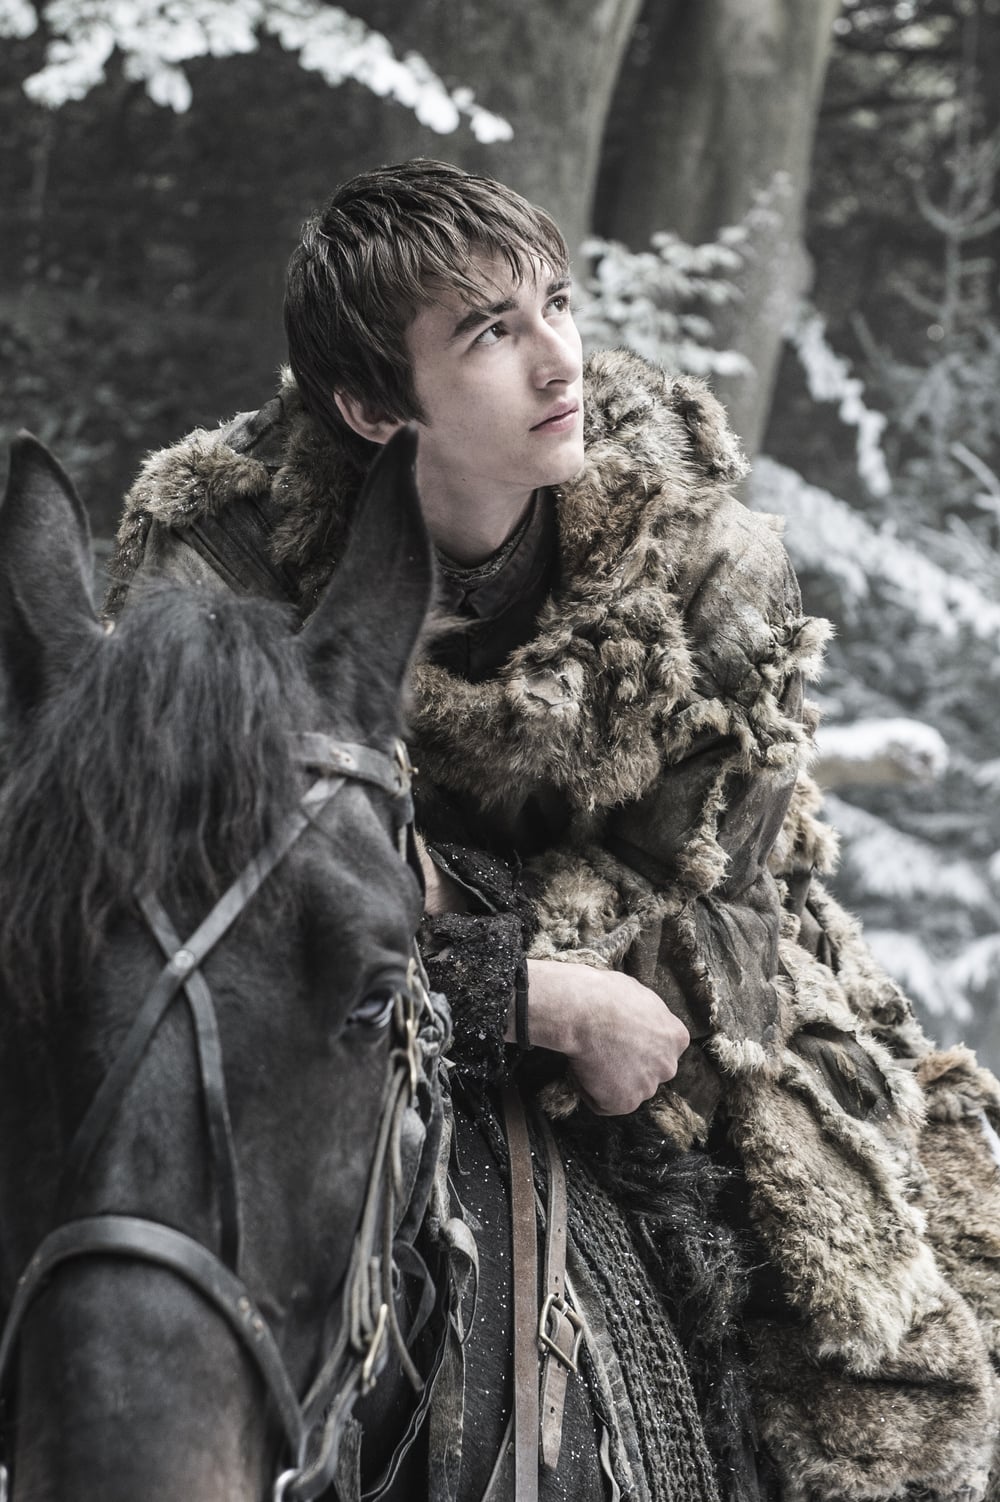 Bran Stark played by Isaac Hempstead Wright. image - supplied/Foxtel